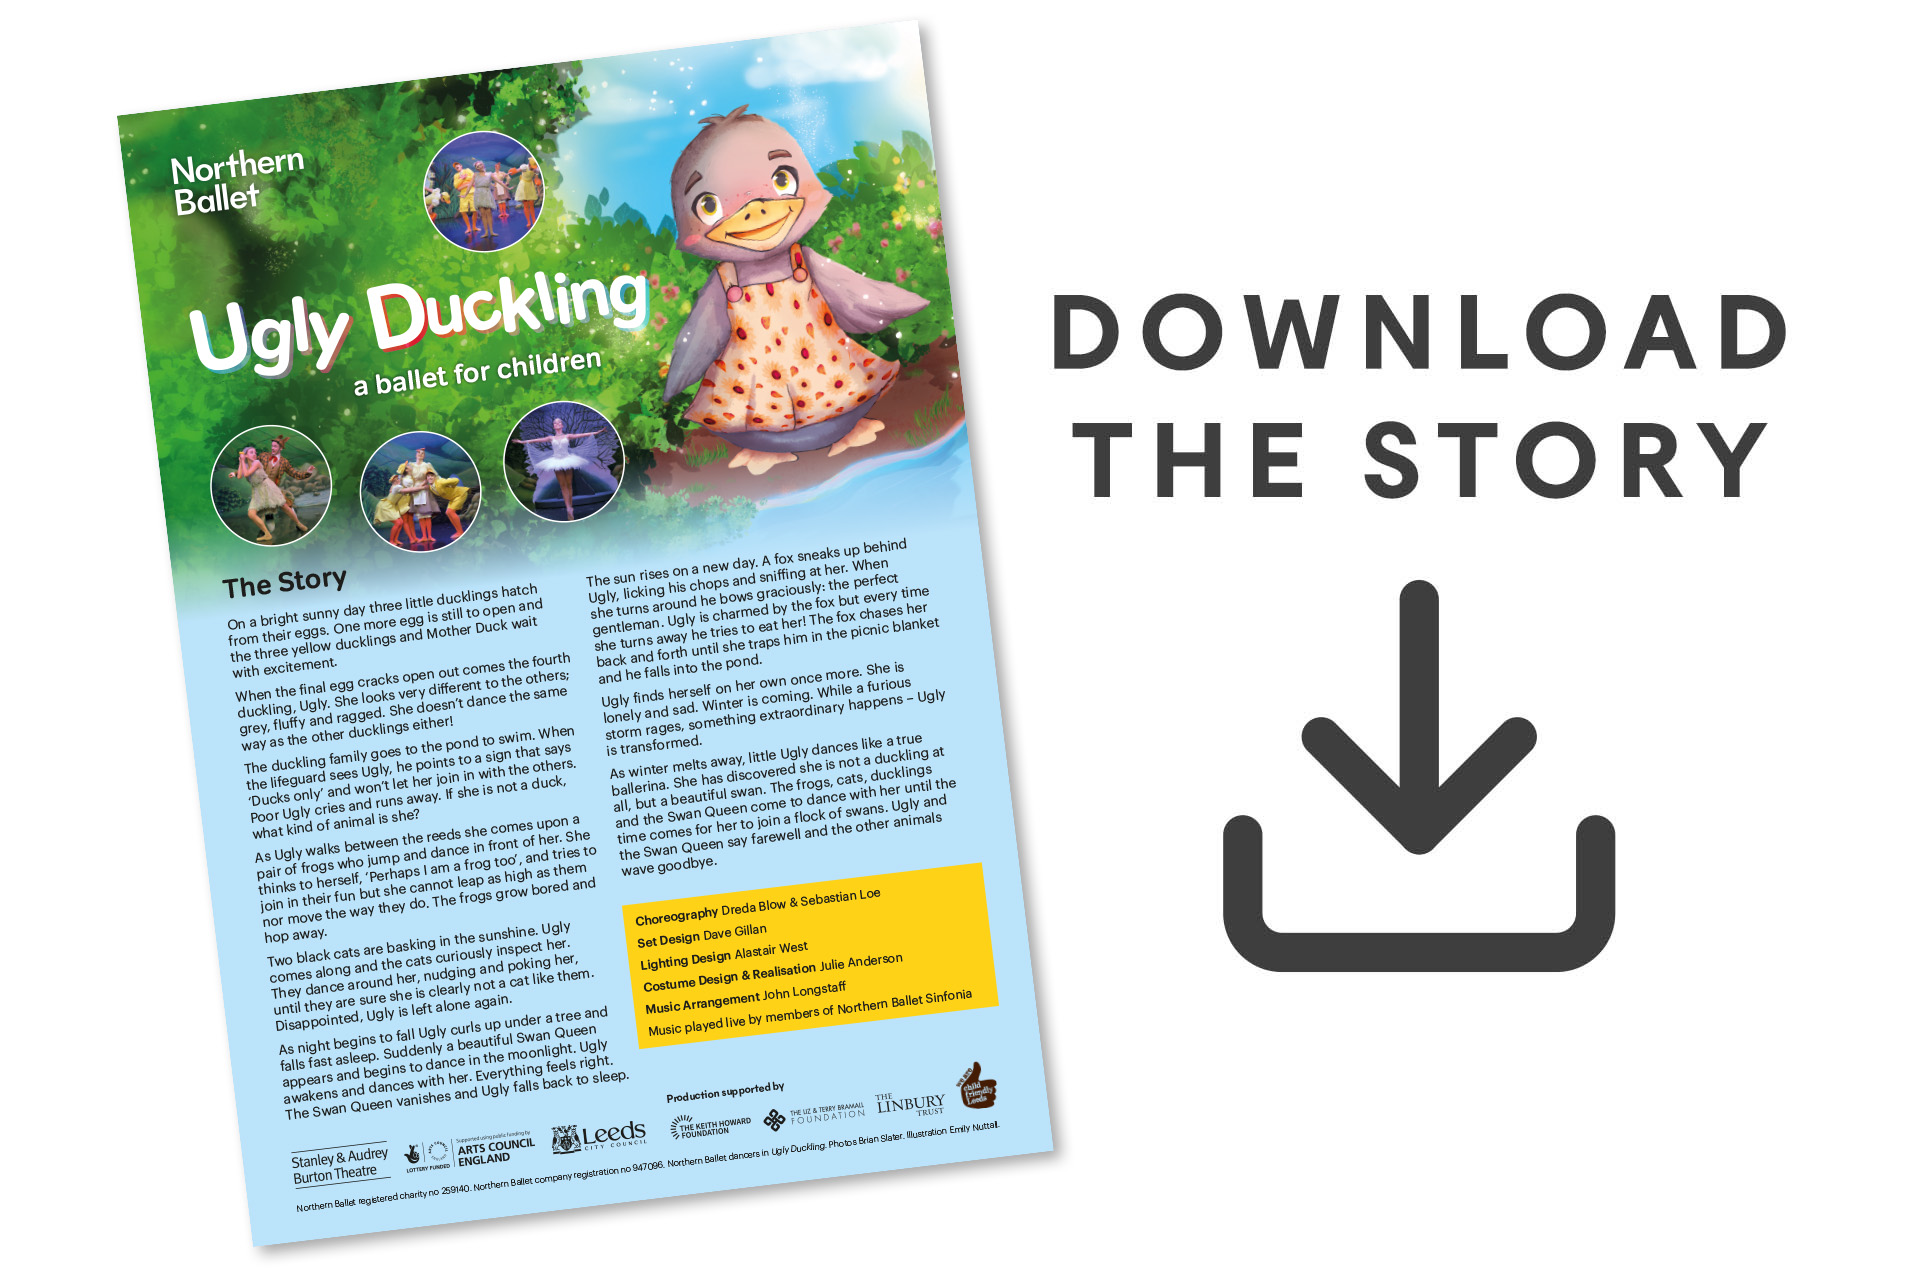 Download the Ugly Duckling story as a PDF